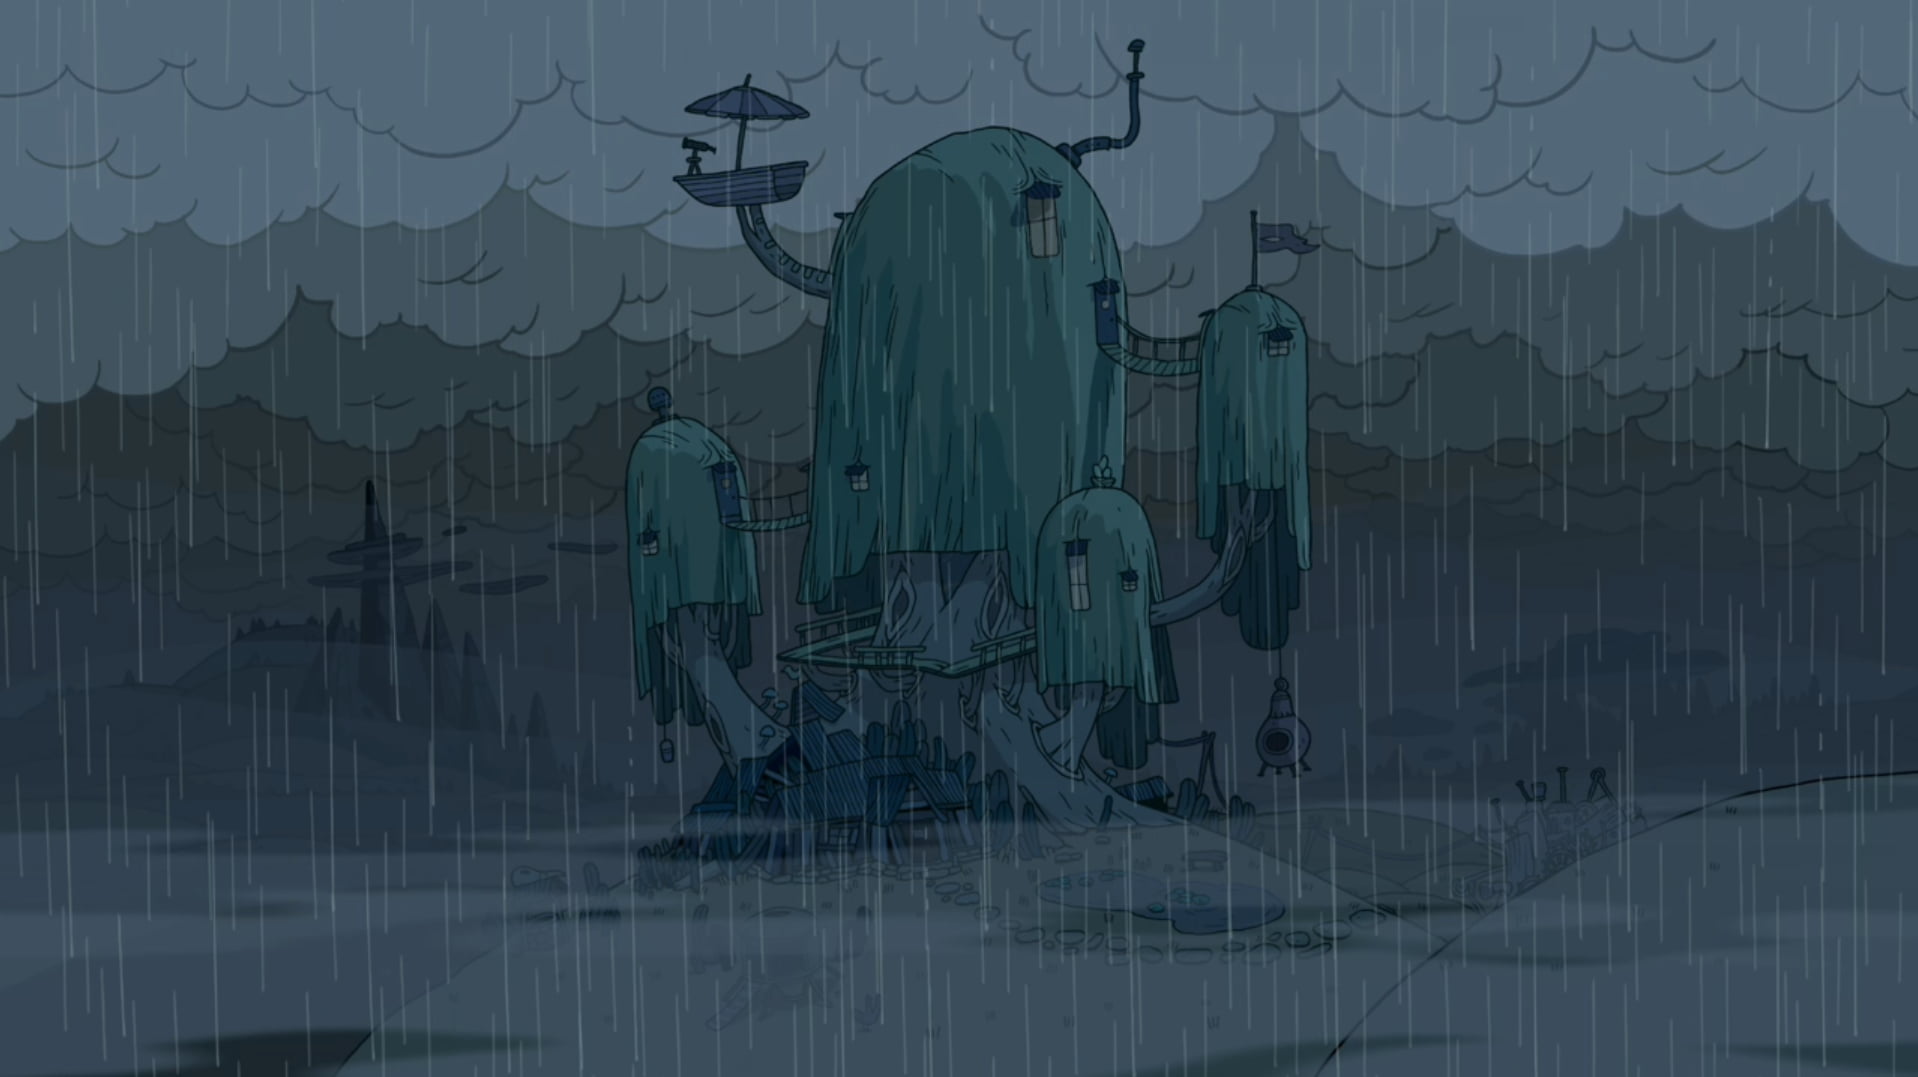 green house illustration, Adventure Time, built structure, reflection